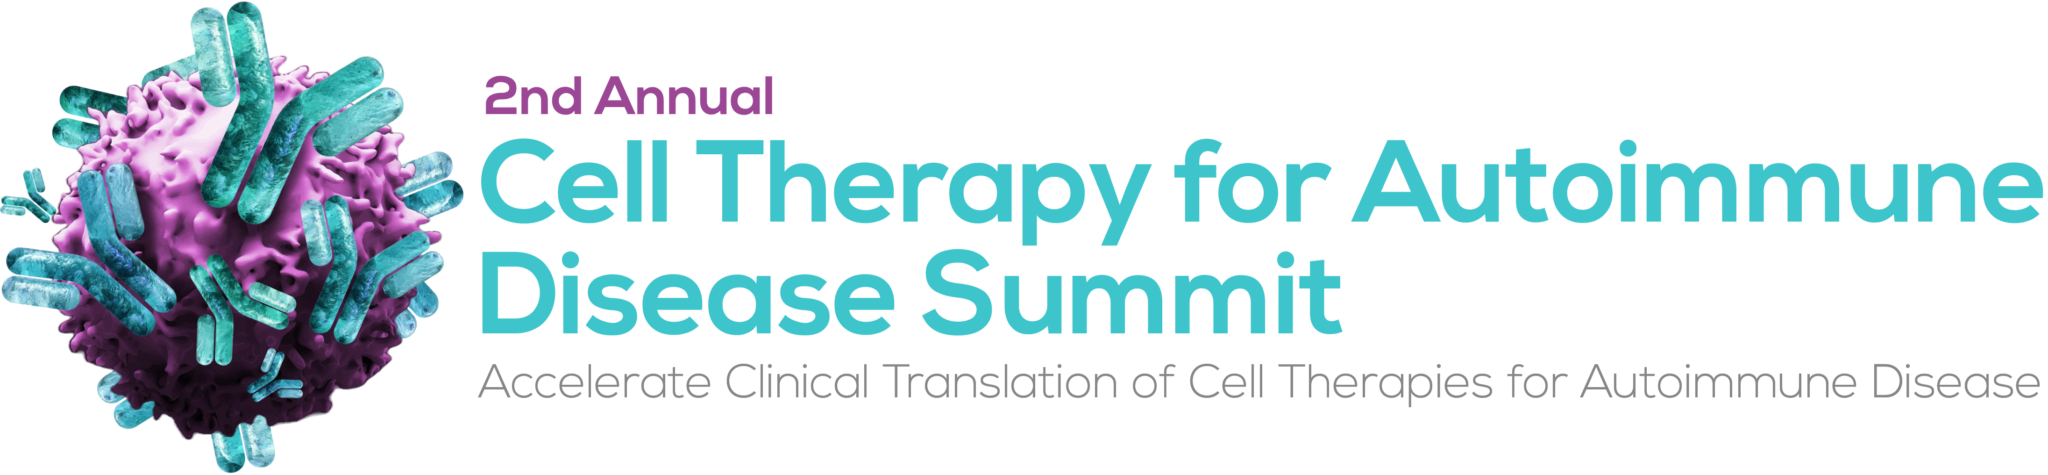 2nd-Annual-Cell-Therapy-for-Autoimmune-Disease-Summit-2048x475